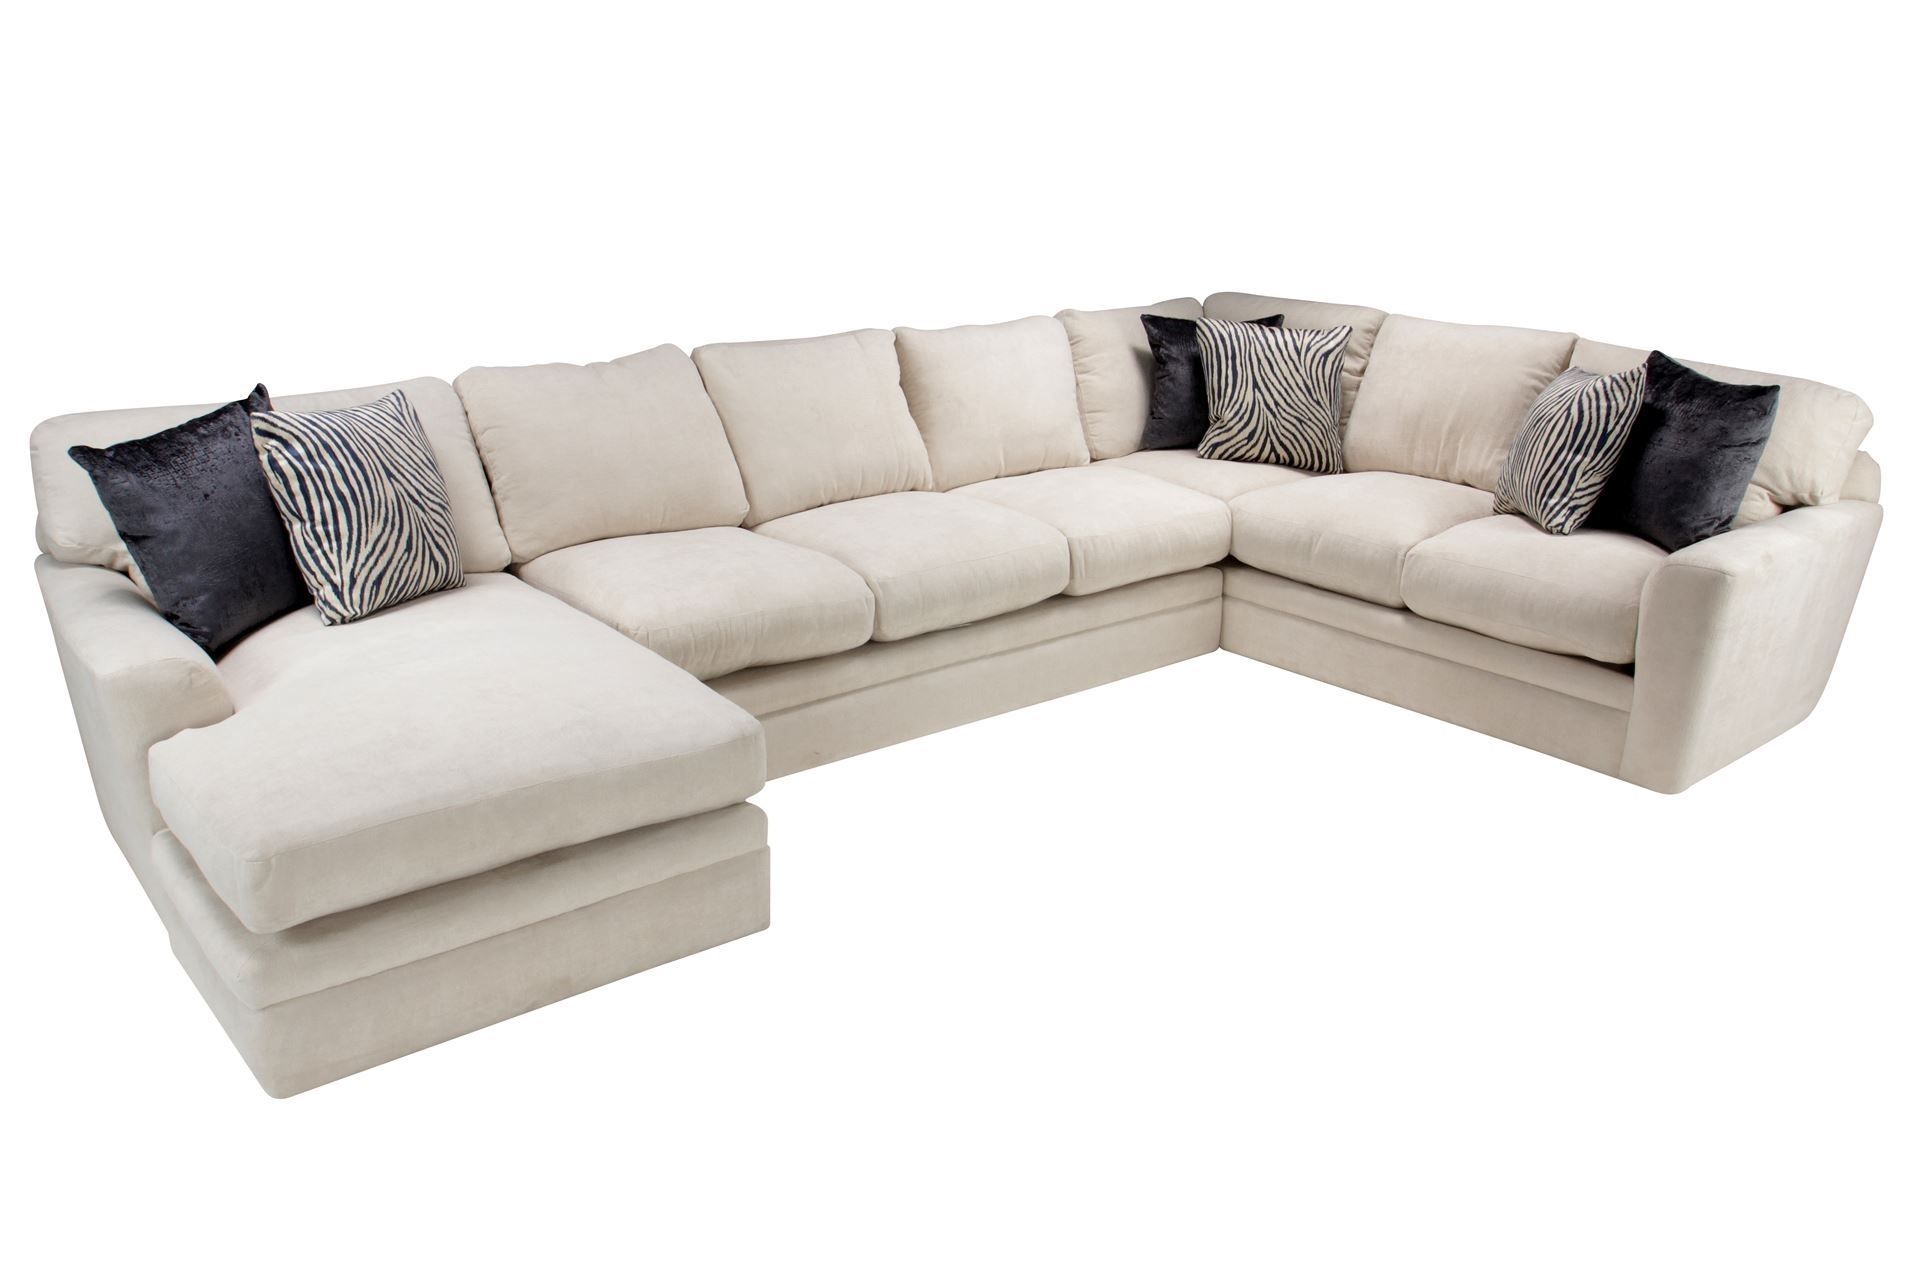 Love This Sectional: Living Spaces Glamour 3 Piece Sectional | Home Intended For Living Spaces Sectional Sofas (View 1 of 10)